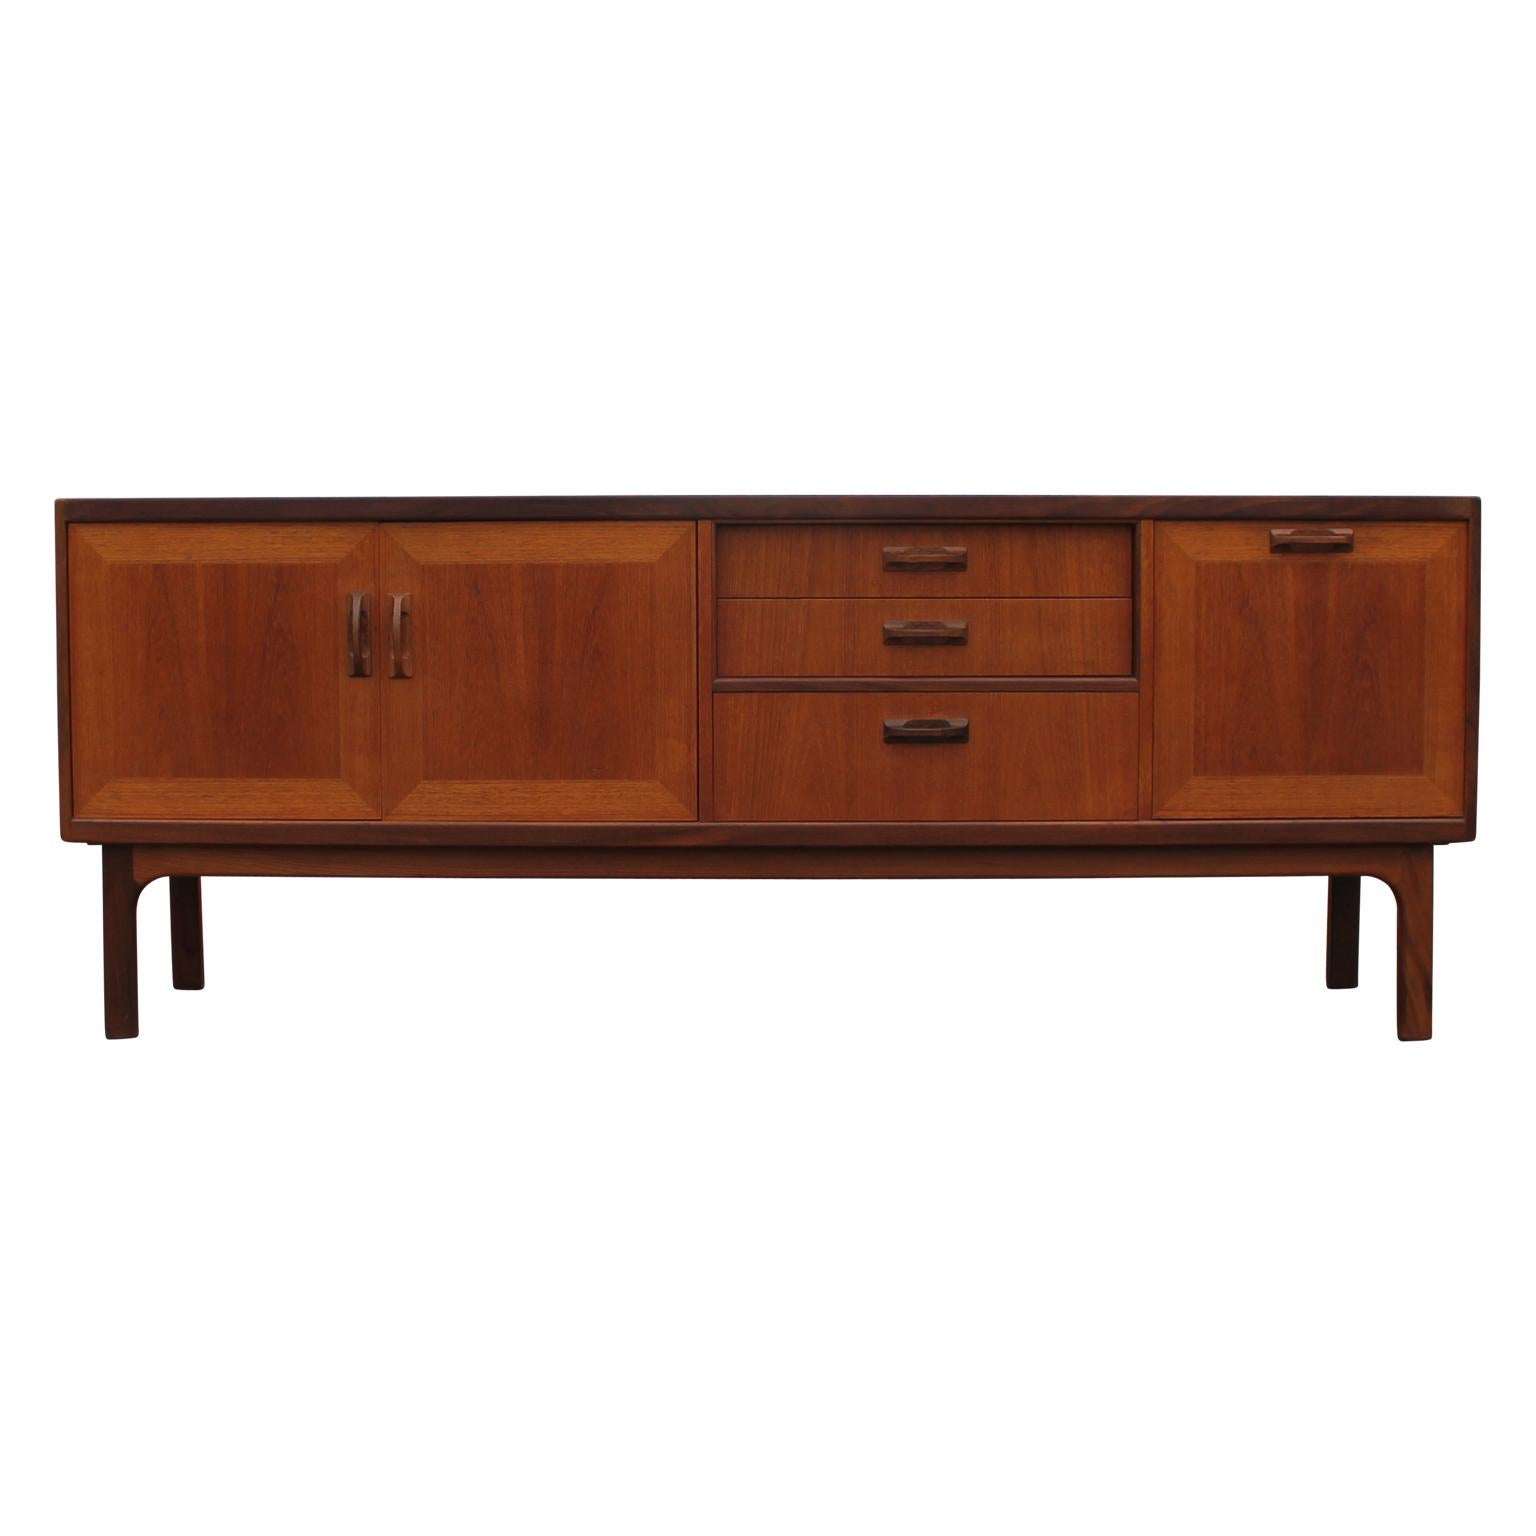 Modern restored teak credenza with a lovely walnut finish by G Plan Furniture. This piece has a cabinet space on the left with a single shelf, three drawers in the centre and a drop door on the right.